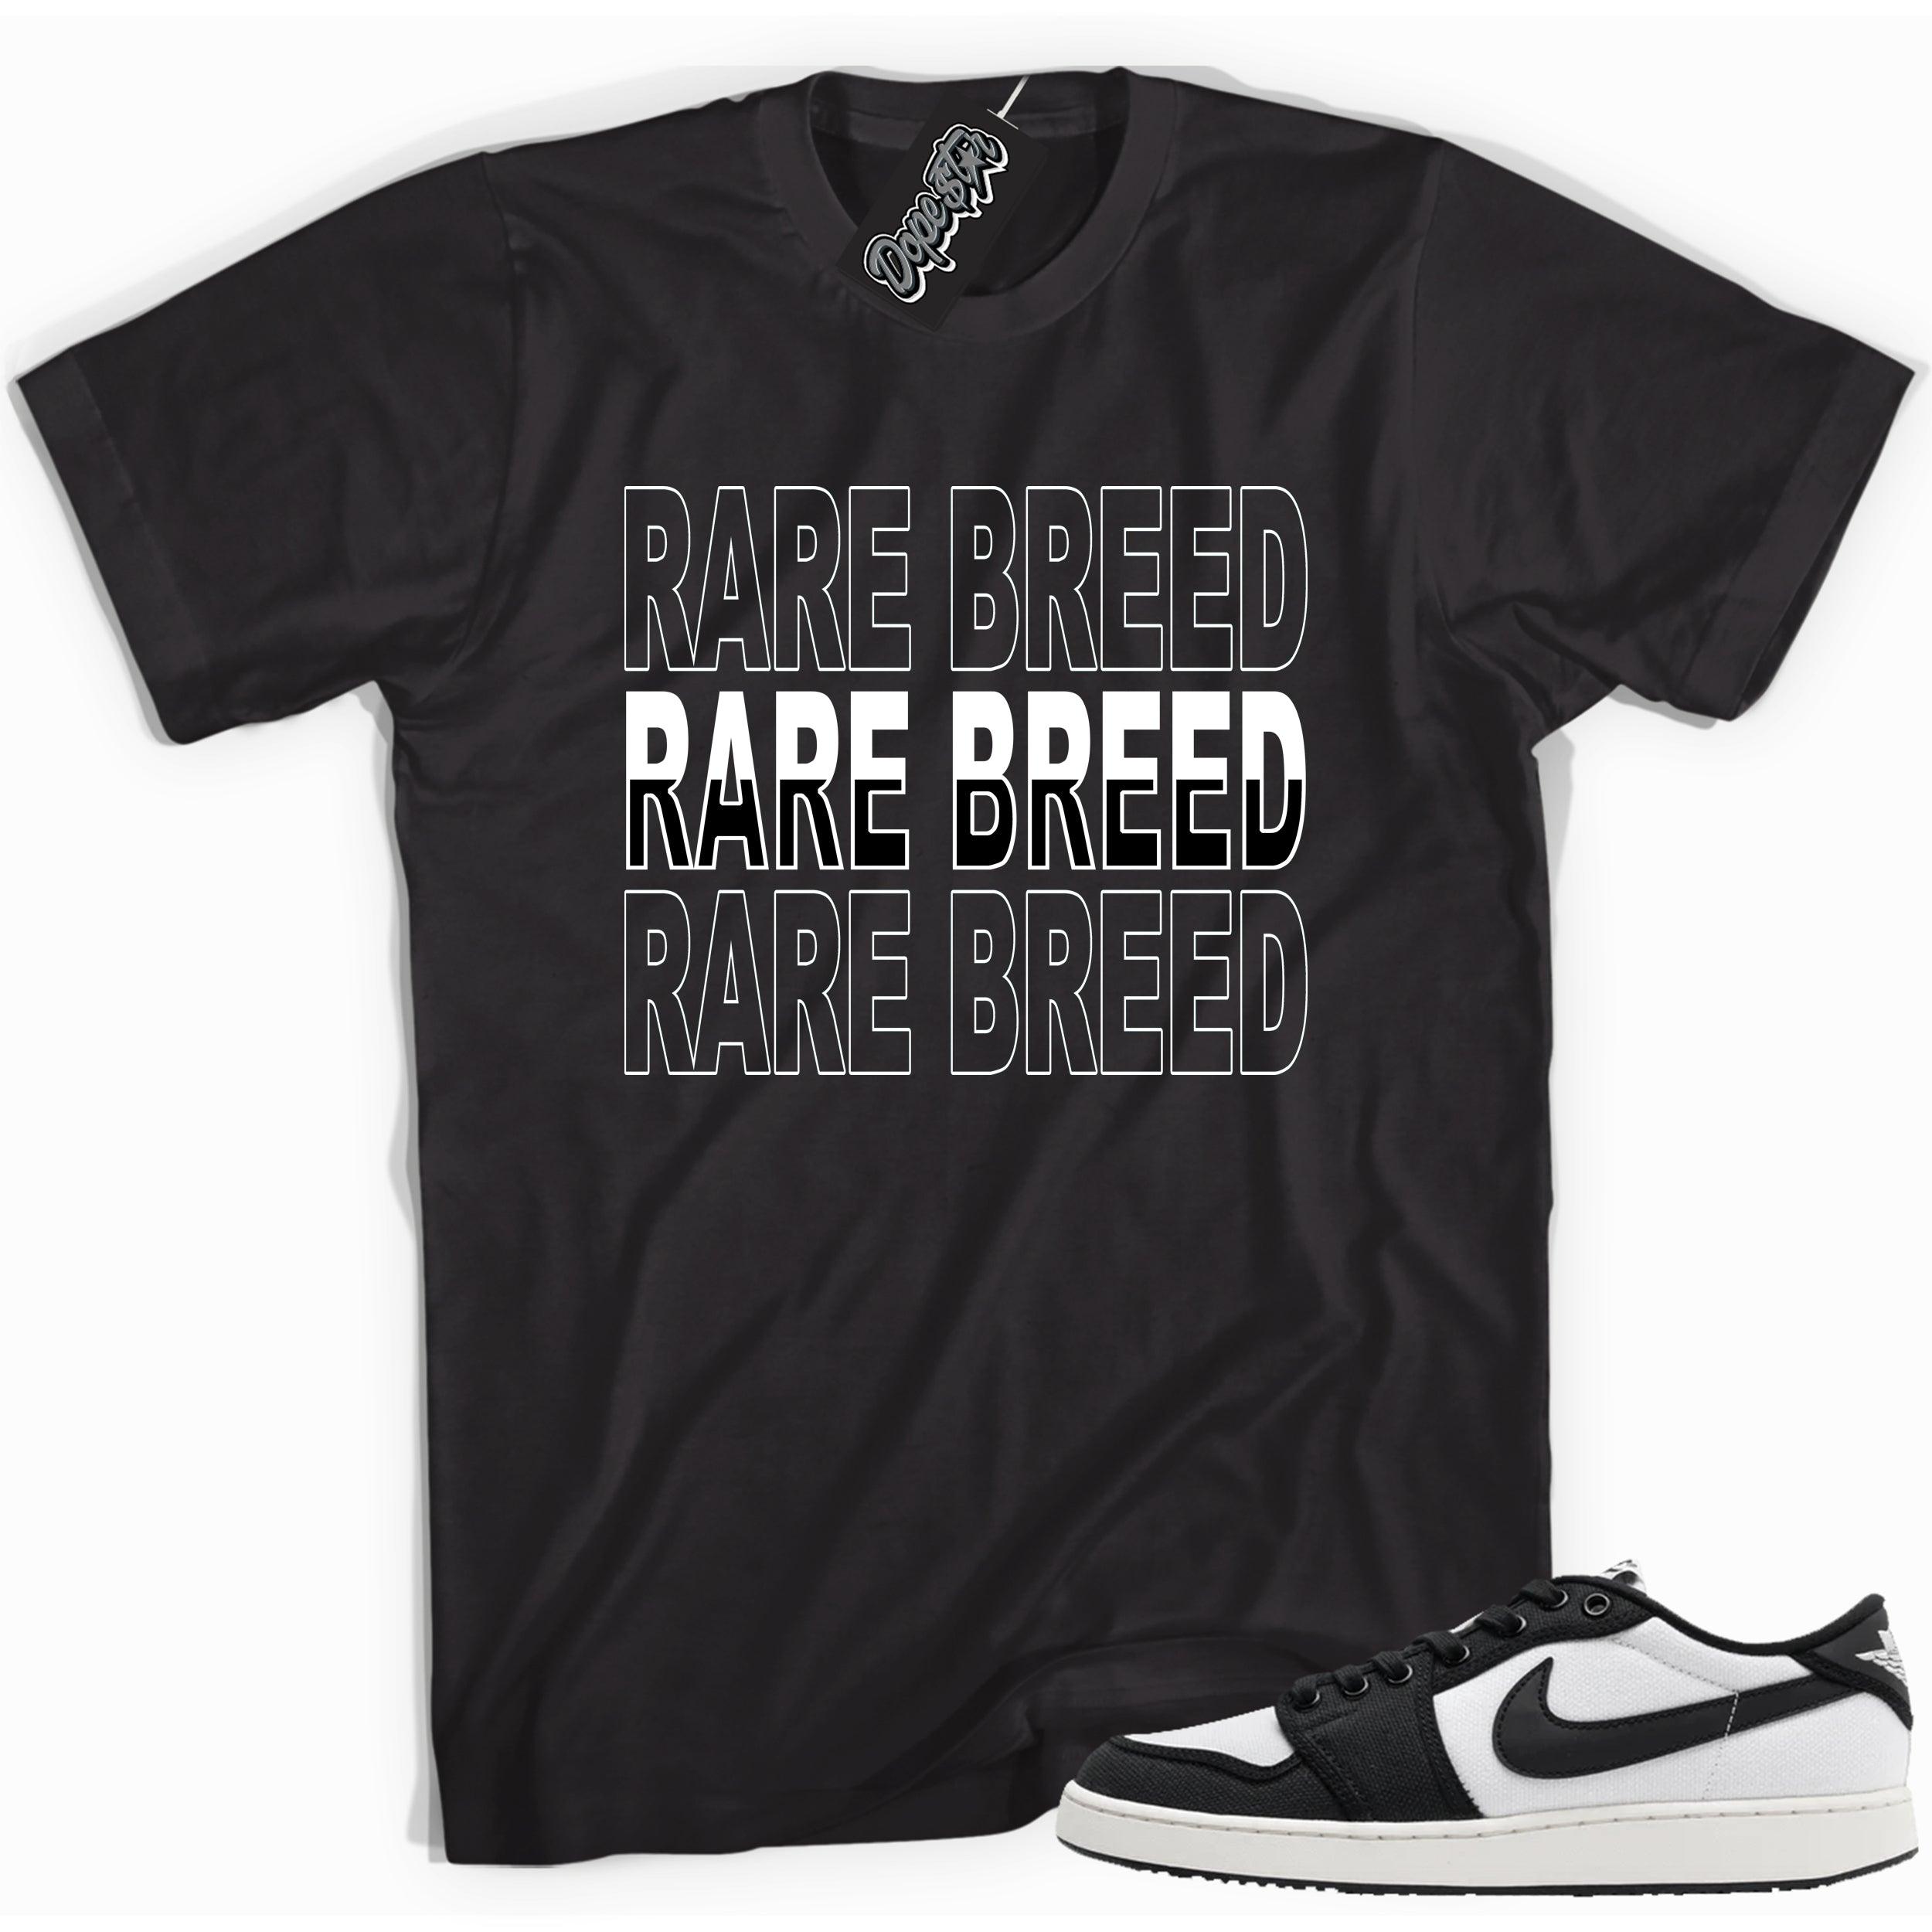 Cool black graphic tee with 'rare breed' print, that perfectly matches Air Jordan 1 Retro Ajko Low Black & White sneakers.